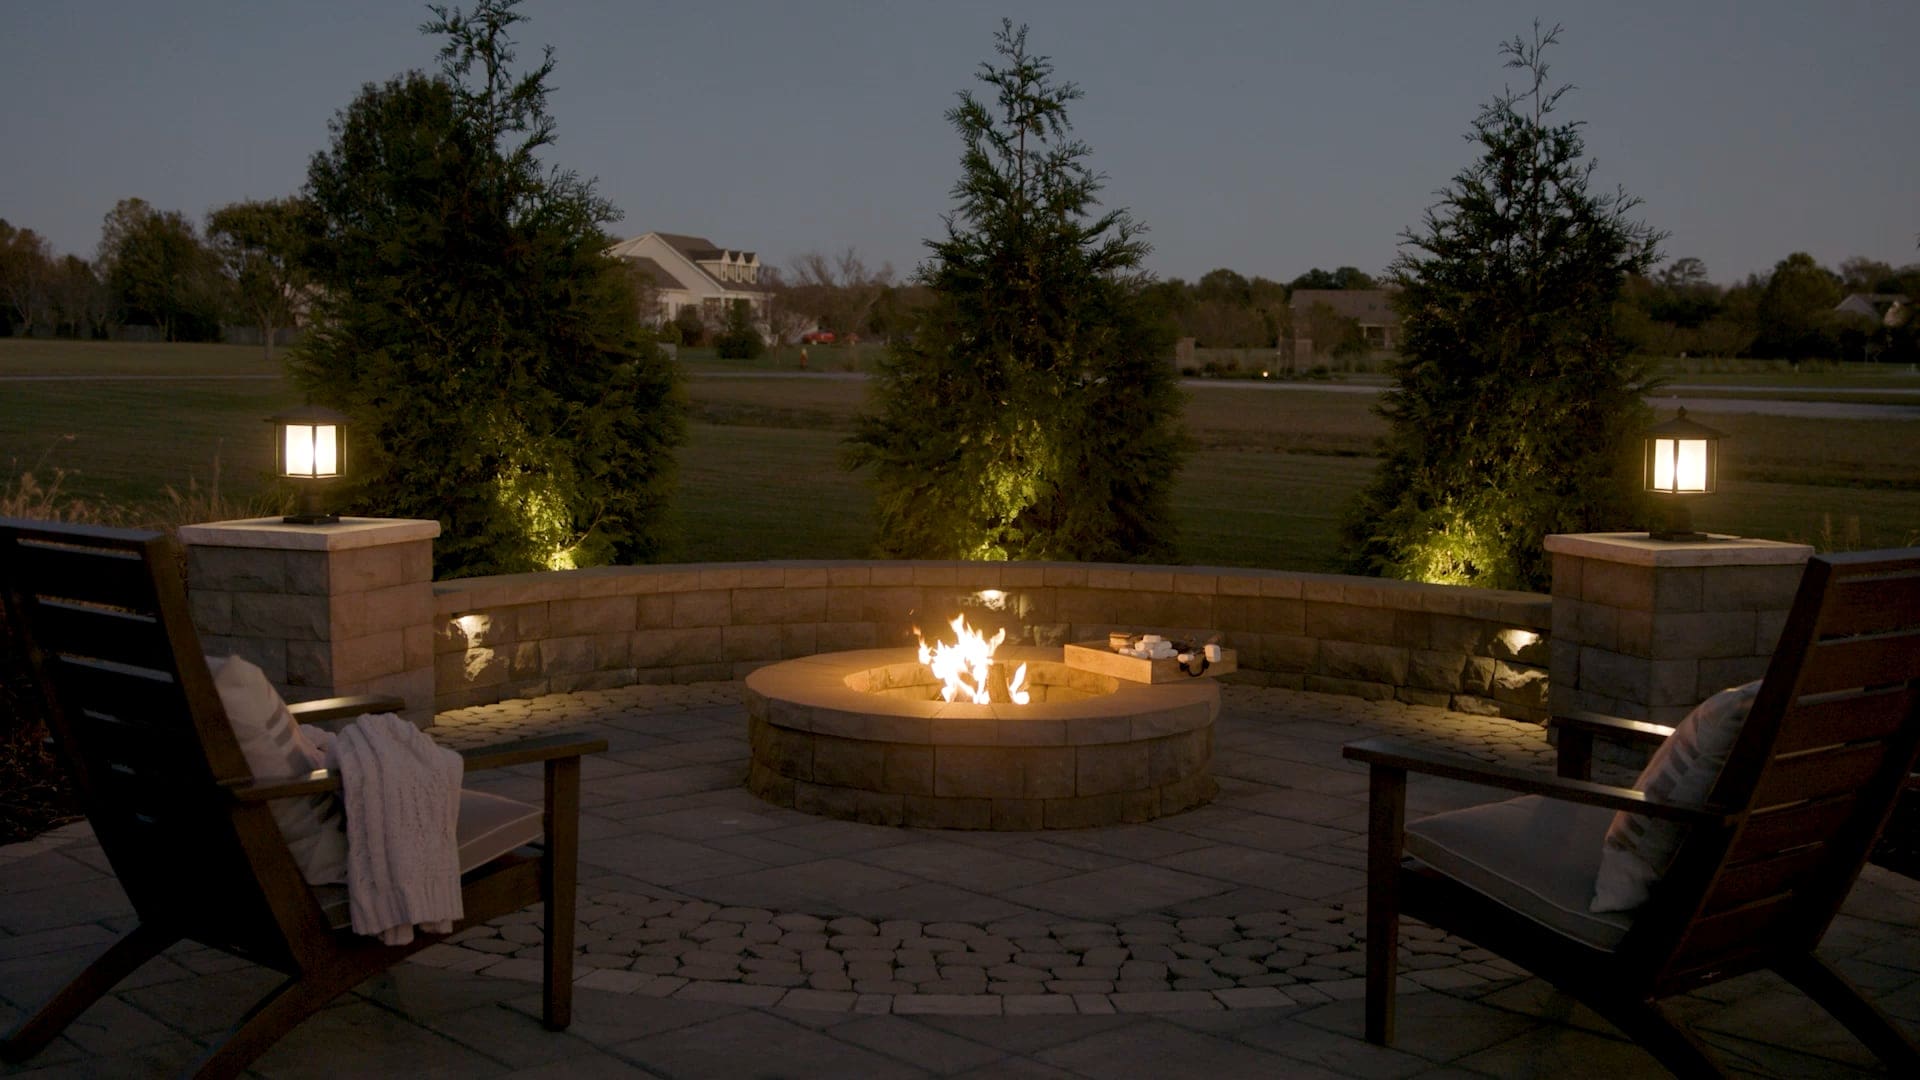 Belgard Rooms living room with firepit in late evening